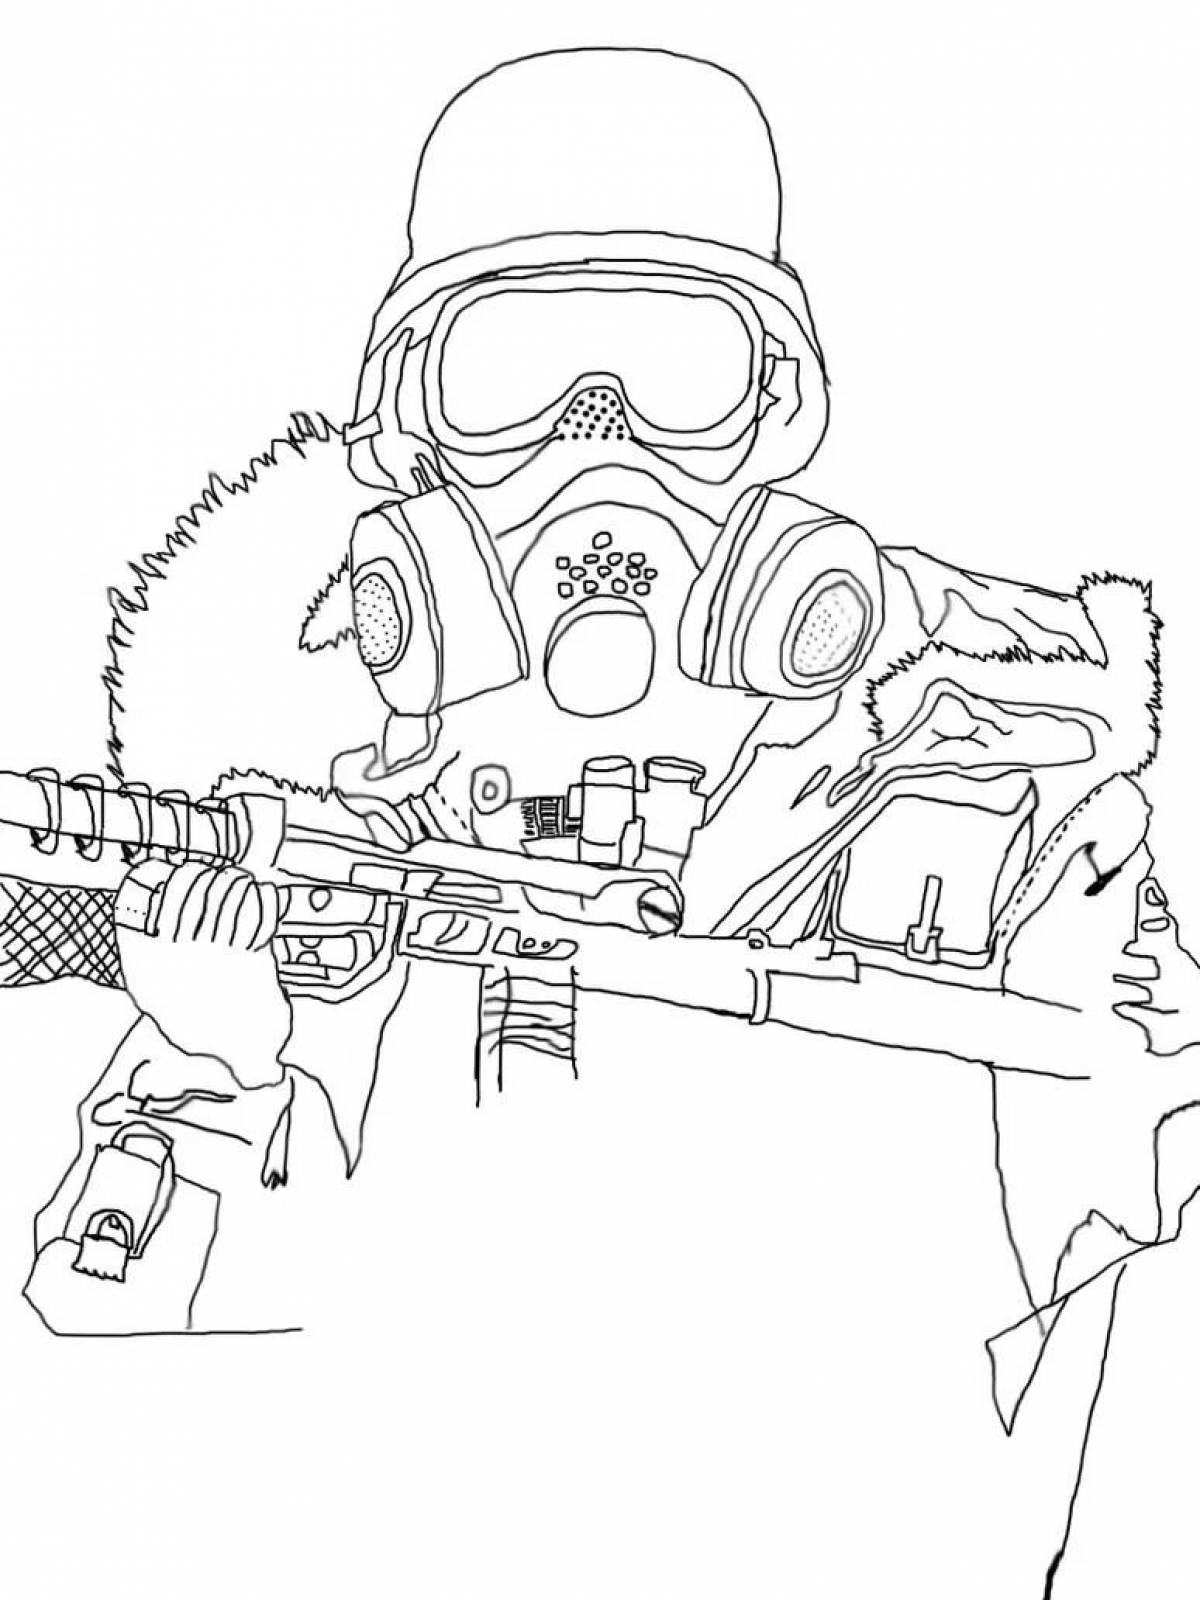 Flawless Subway Game coloring page